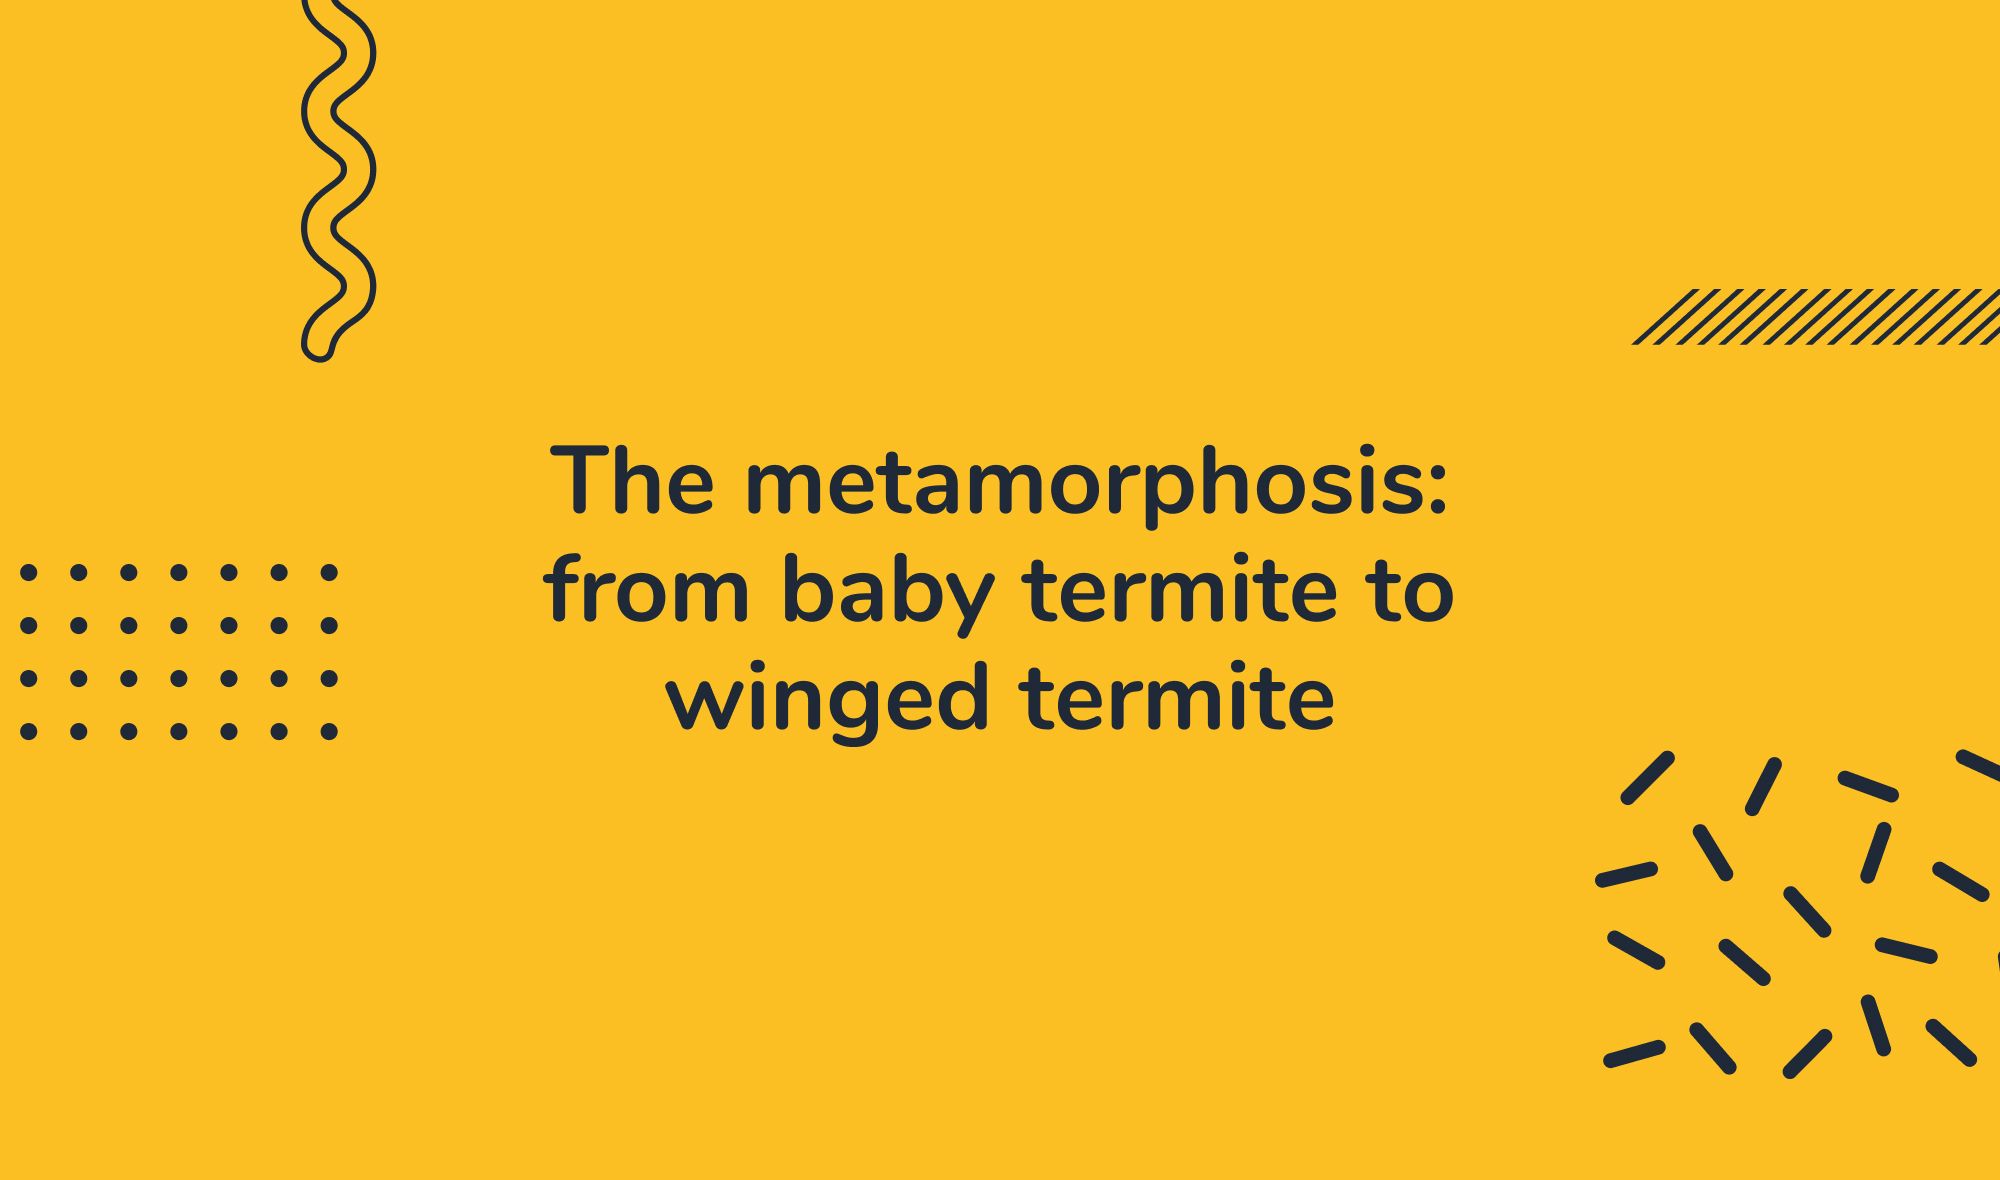 The metamorphosis: from baby termite to winged termite